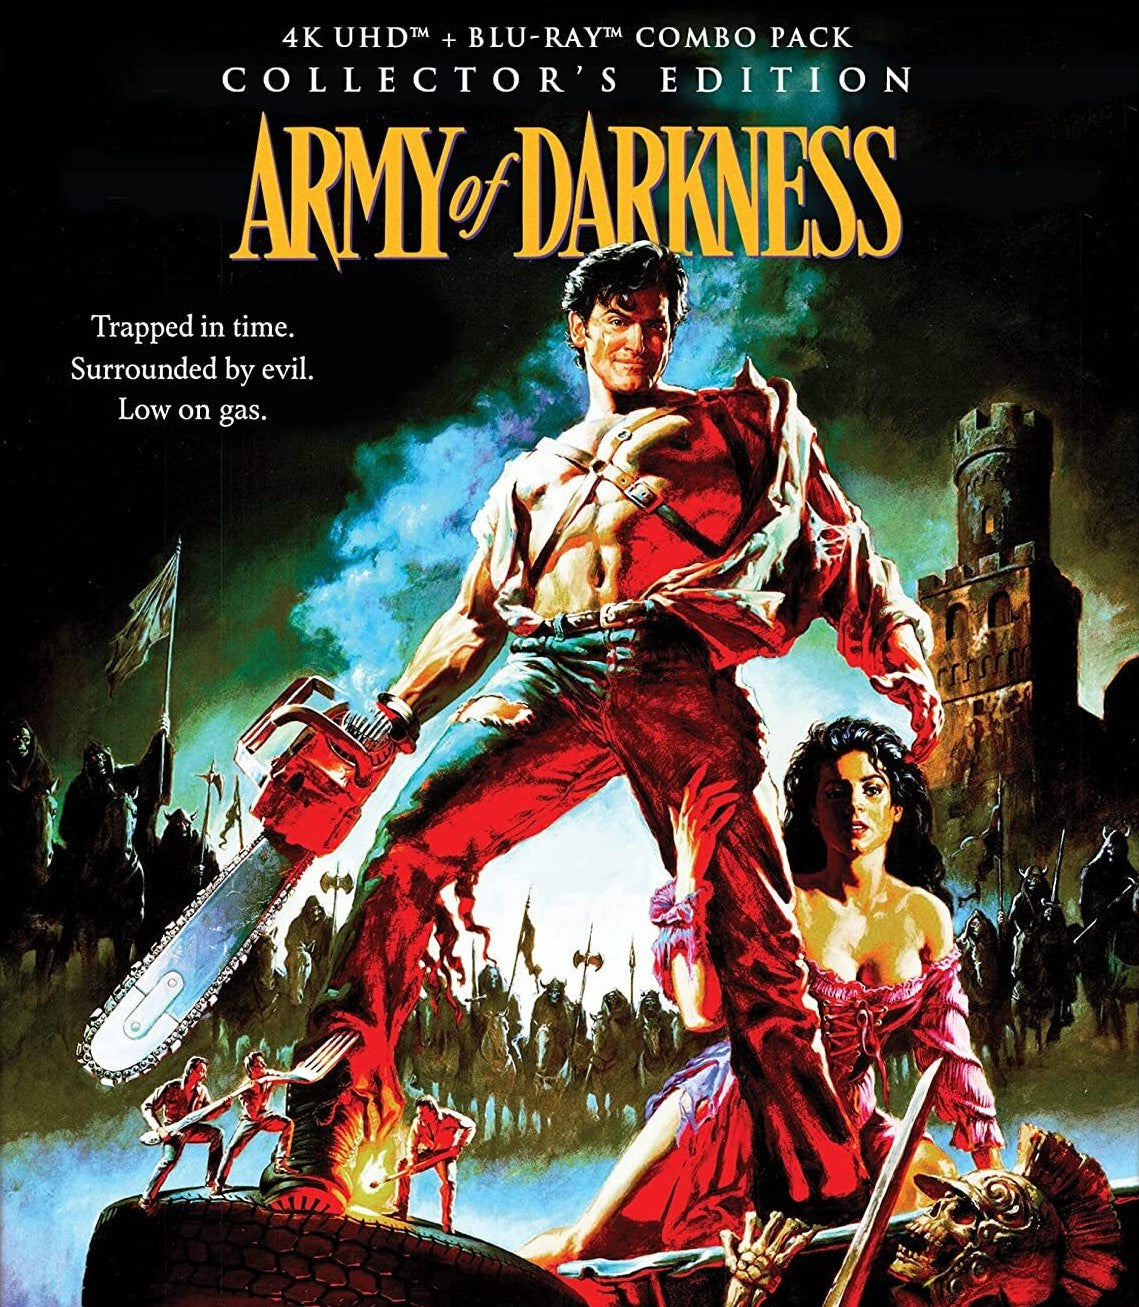 ARMY OF DARKNESS (COLLECTOR'S EDITION) 4K UHD/BLU-RAY